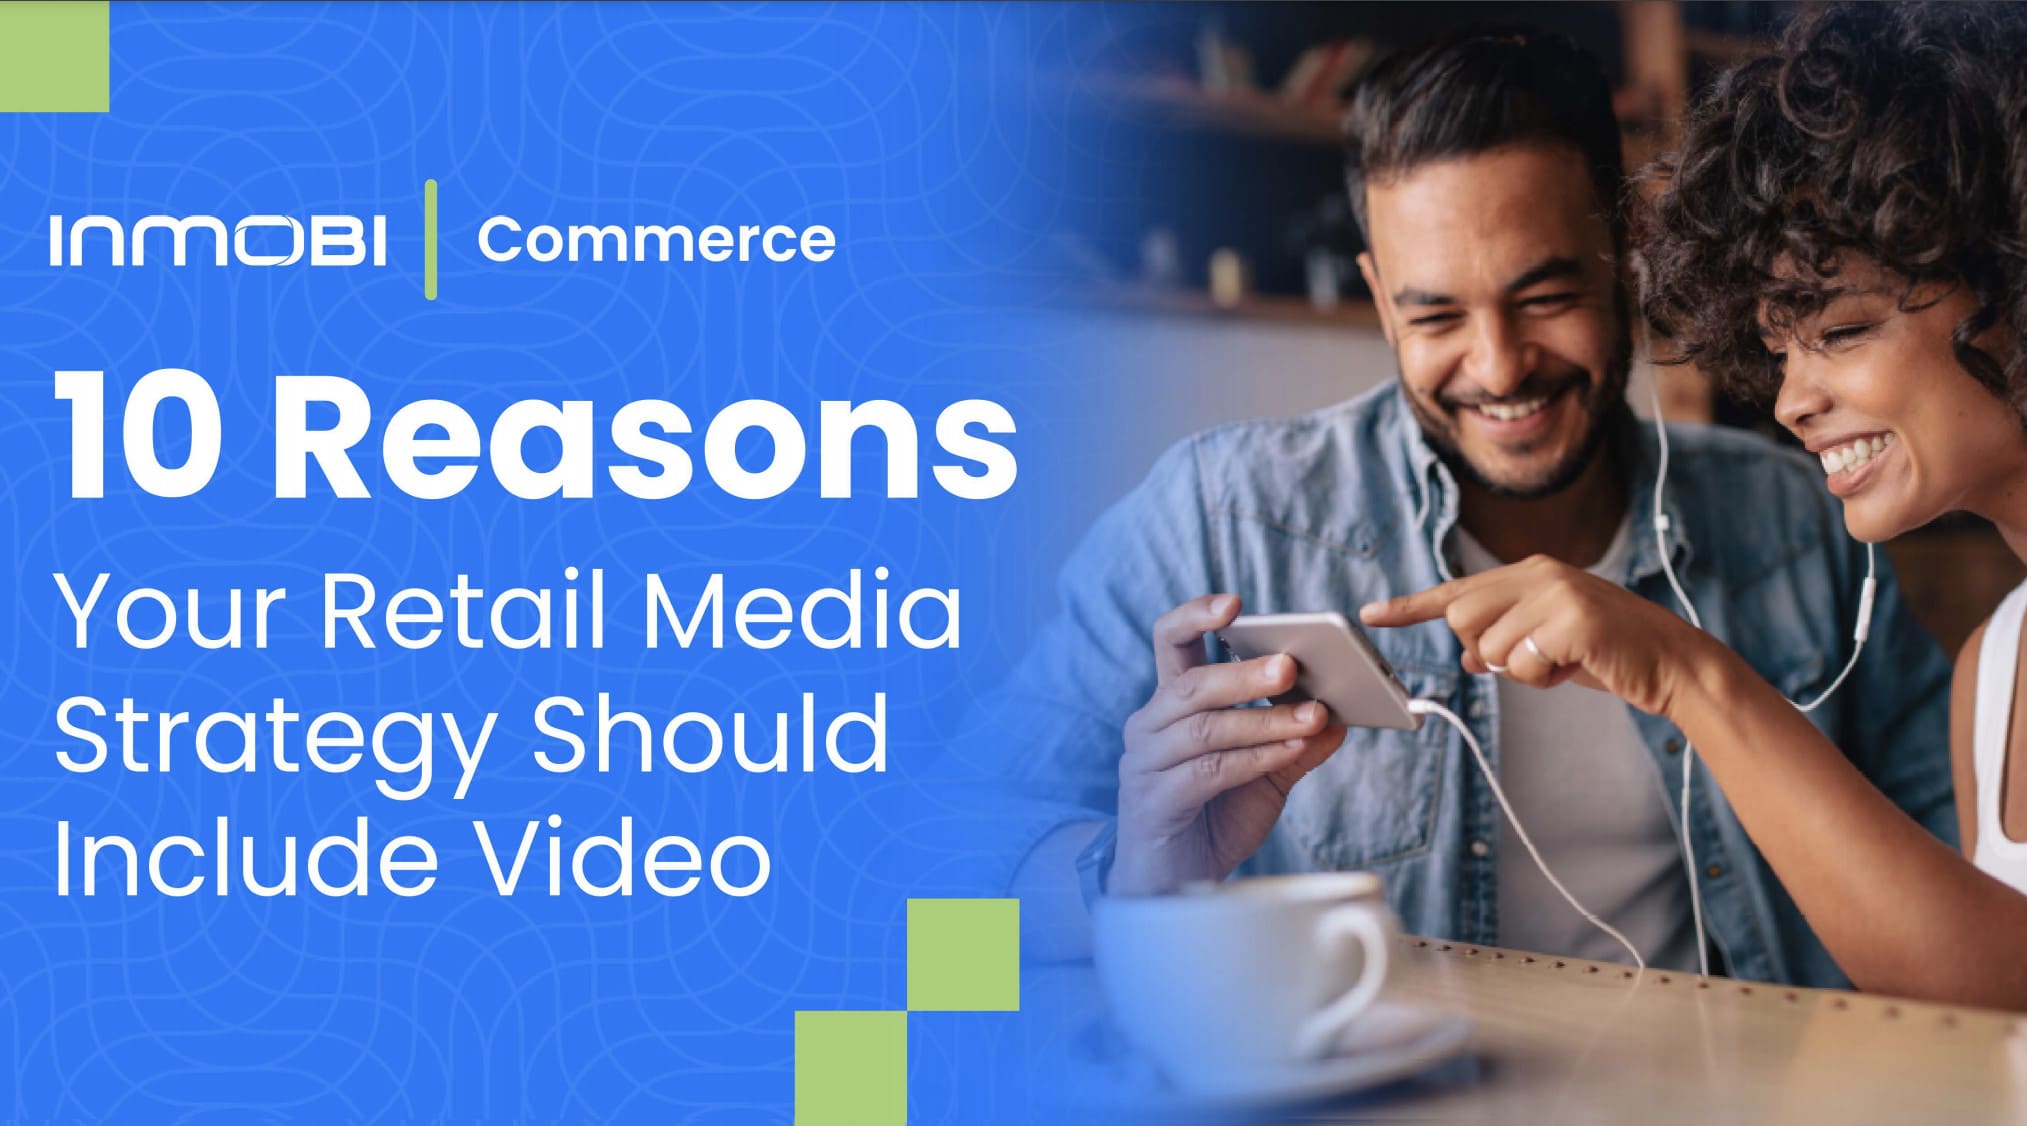 10 Reasons Your Retail Media Strategy Should Include Video [Infographic]